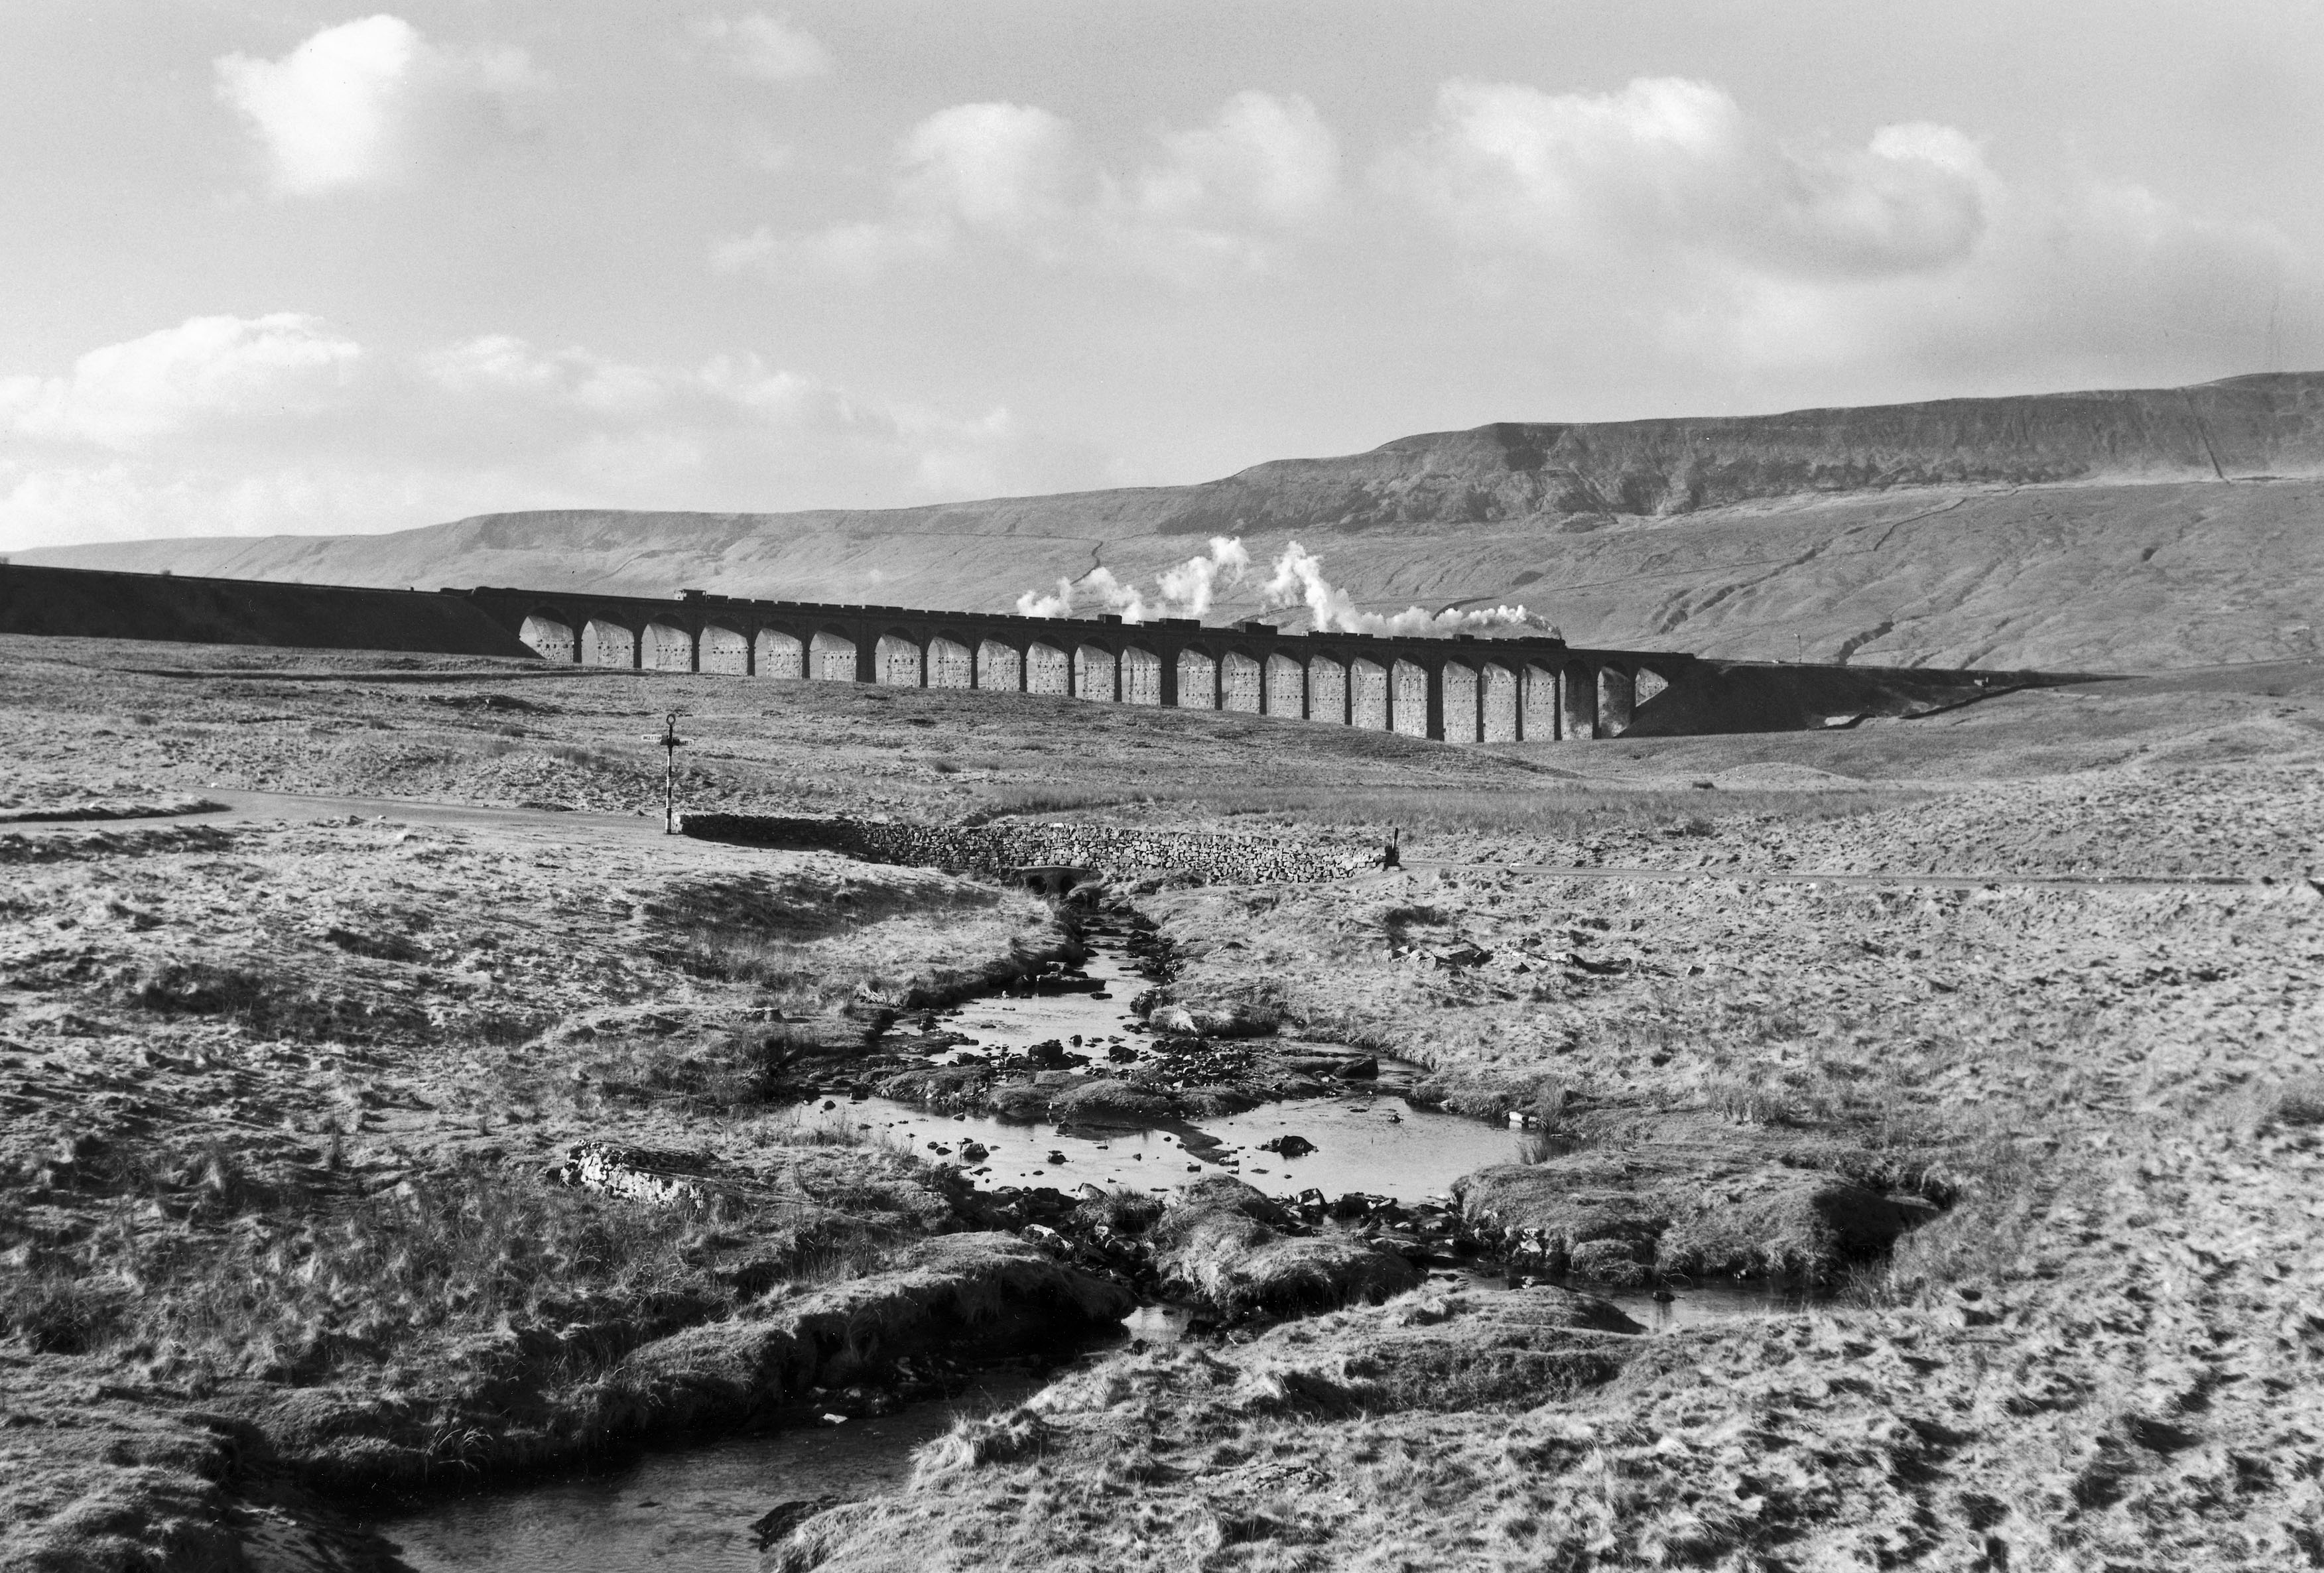 Ribblehead Viaduct on the Settle & Carlisle Railway is an iconic railway structure. Here, Eric Treacy captures a goods train on the viaduct